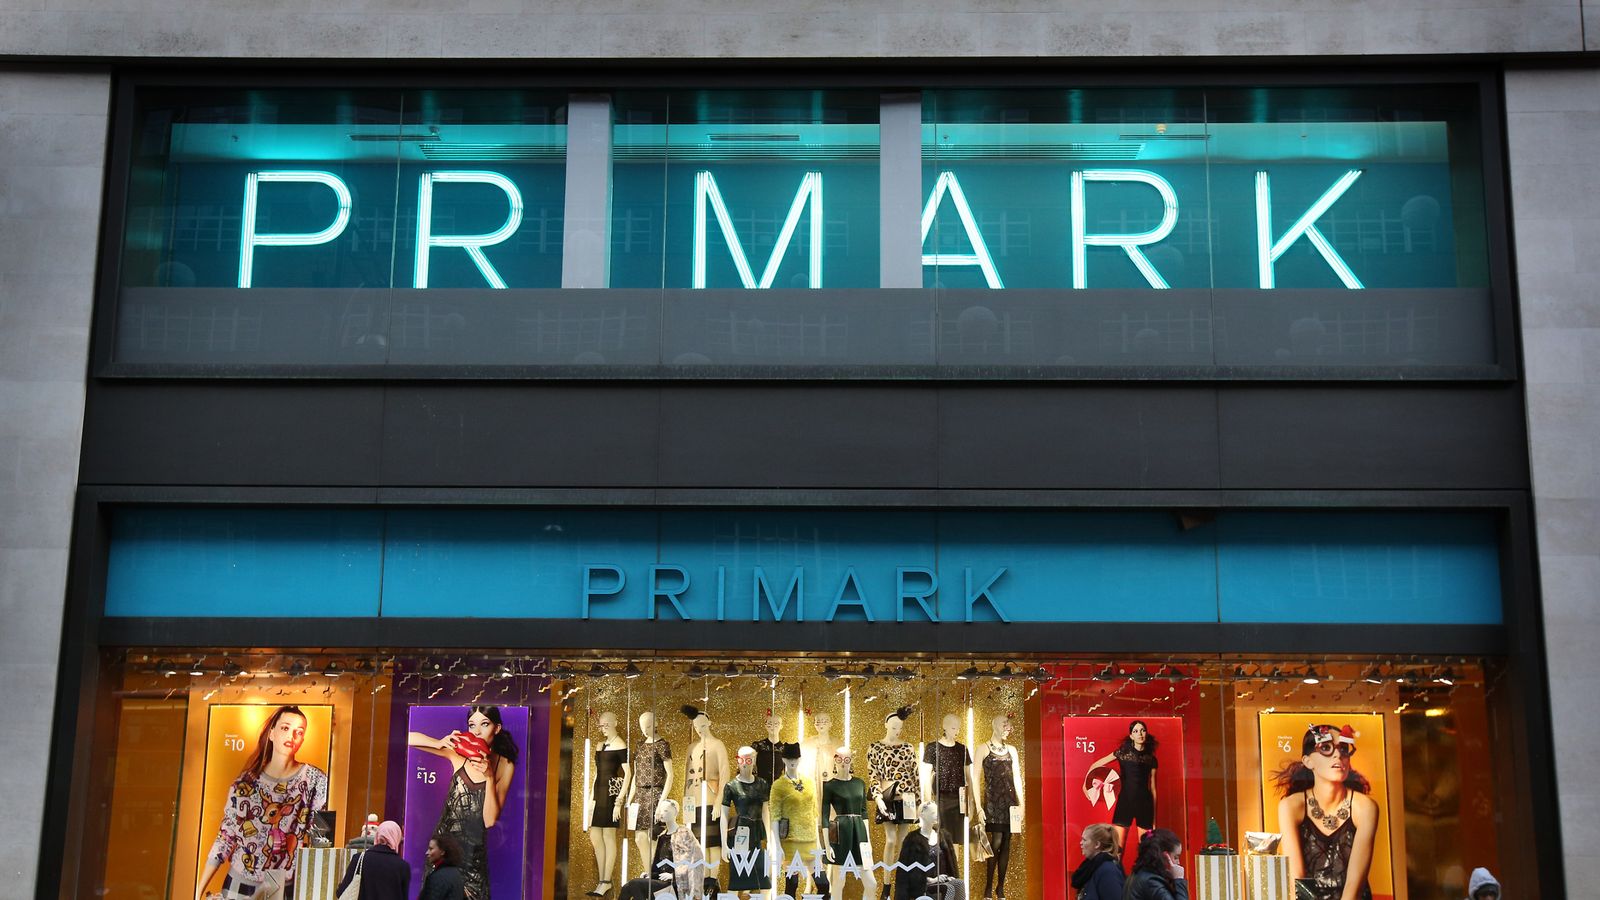 Primark shines as retail body warns on sales ahead of Christmas